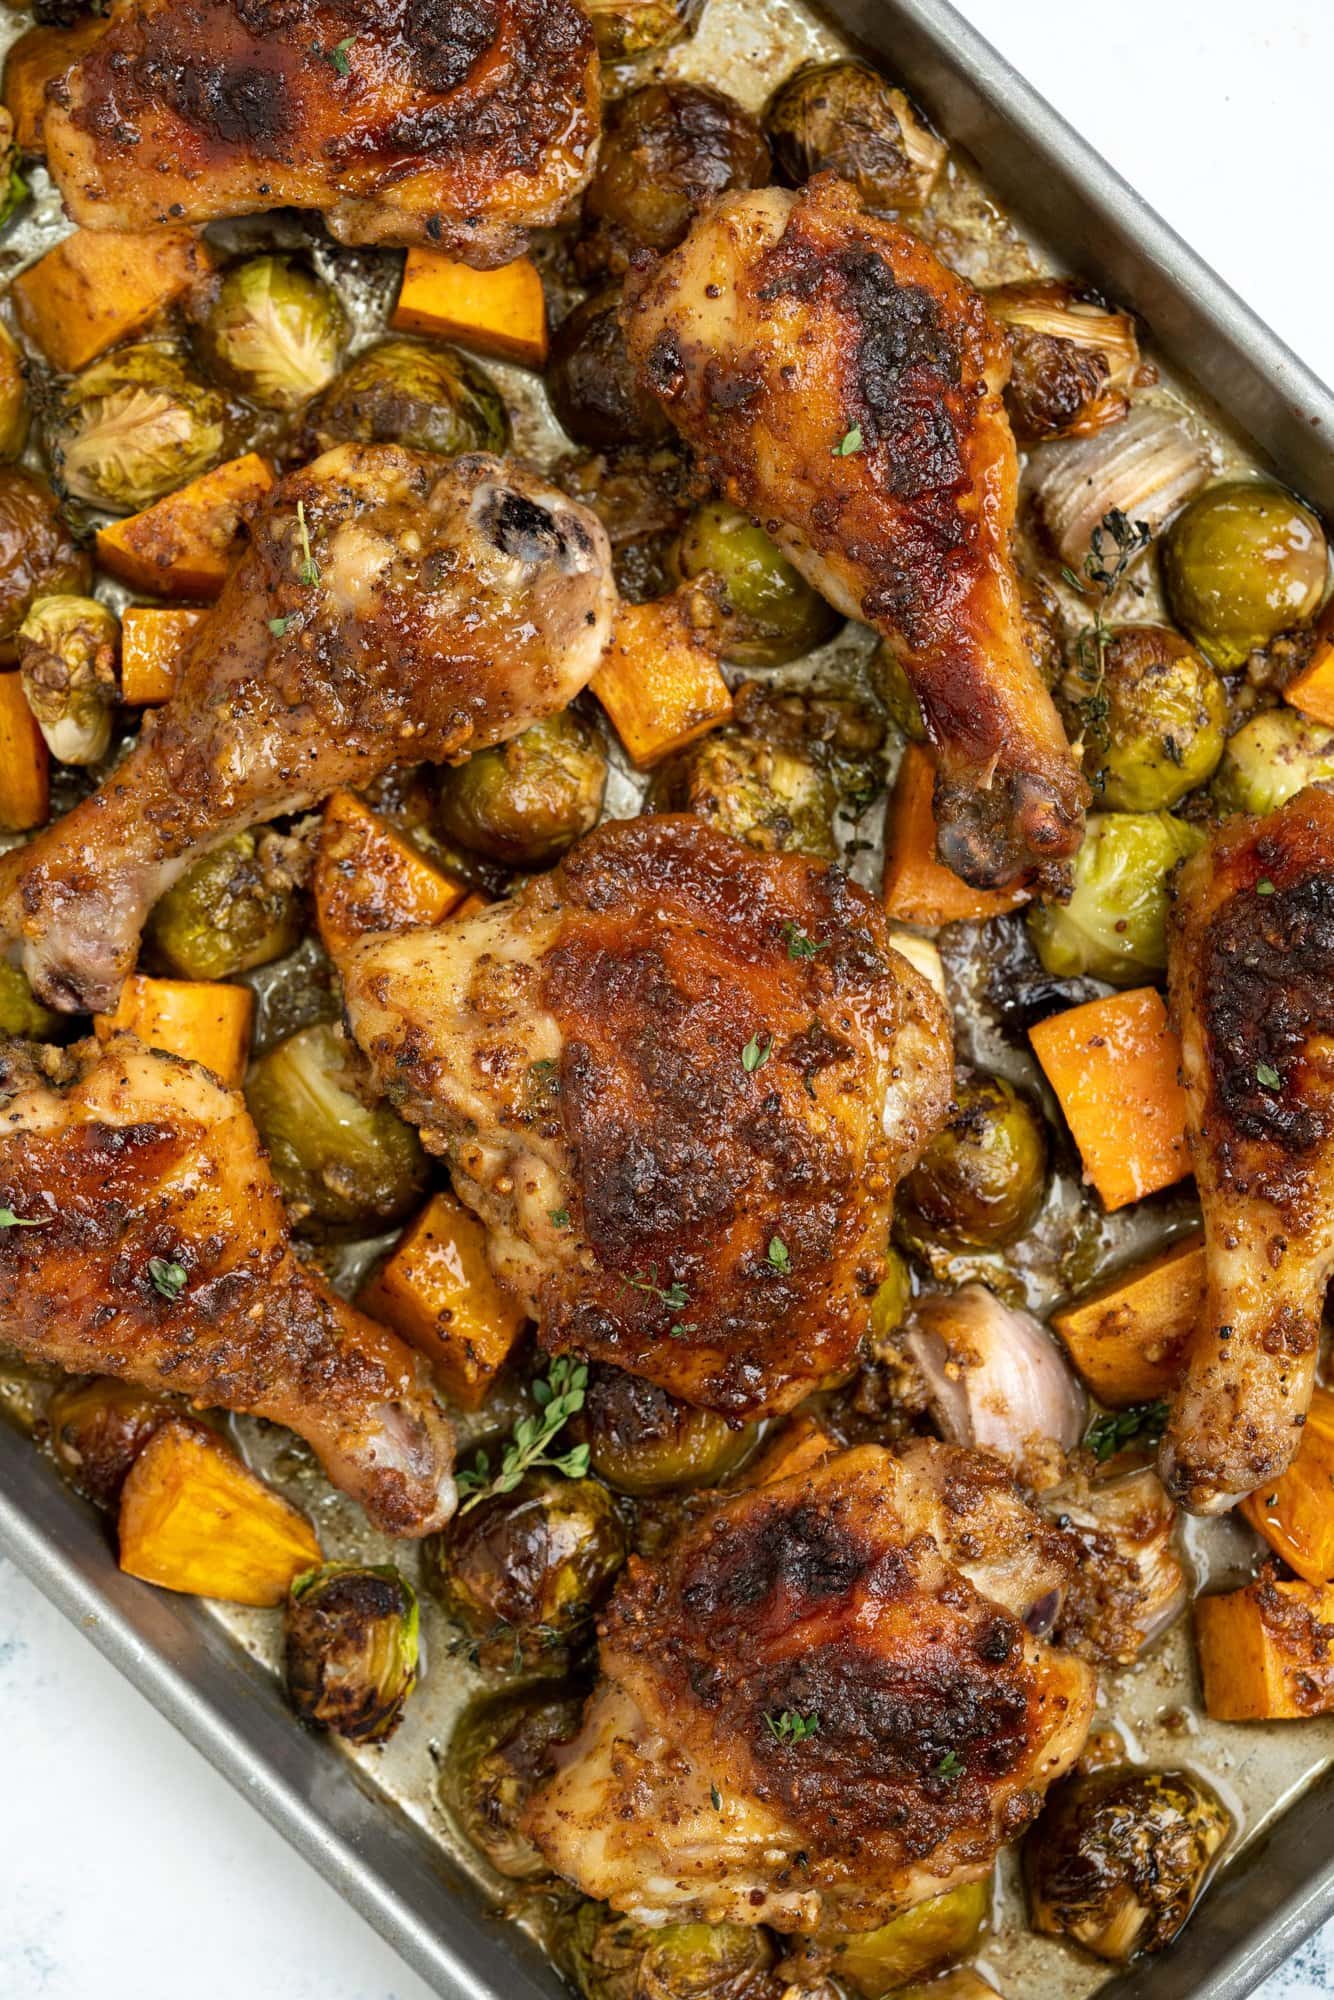 Chicken legs and thighs are baked along with brussel sprouts, sweet potatoes and onions, with a maple mustard dressing in a sheet pan.